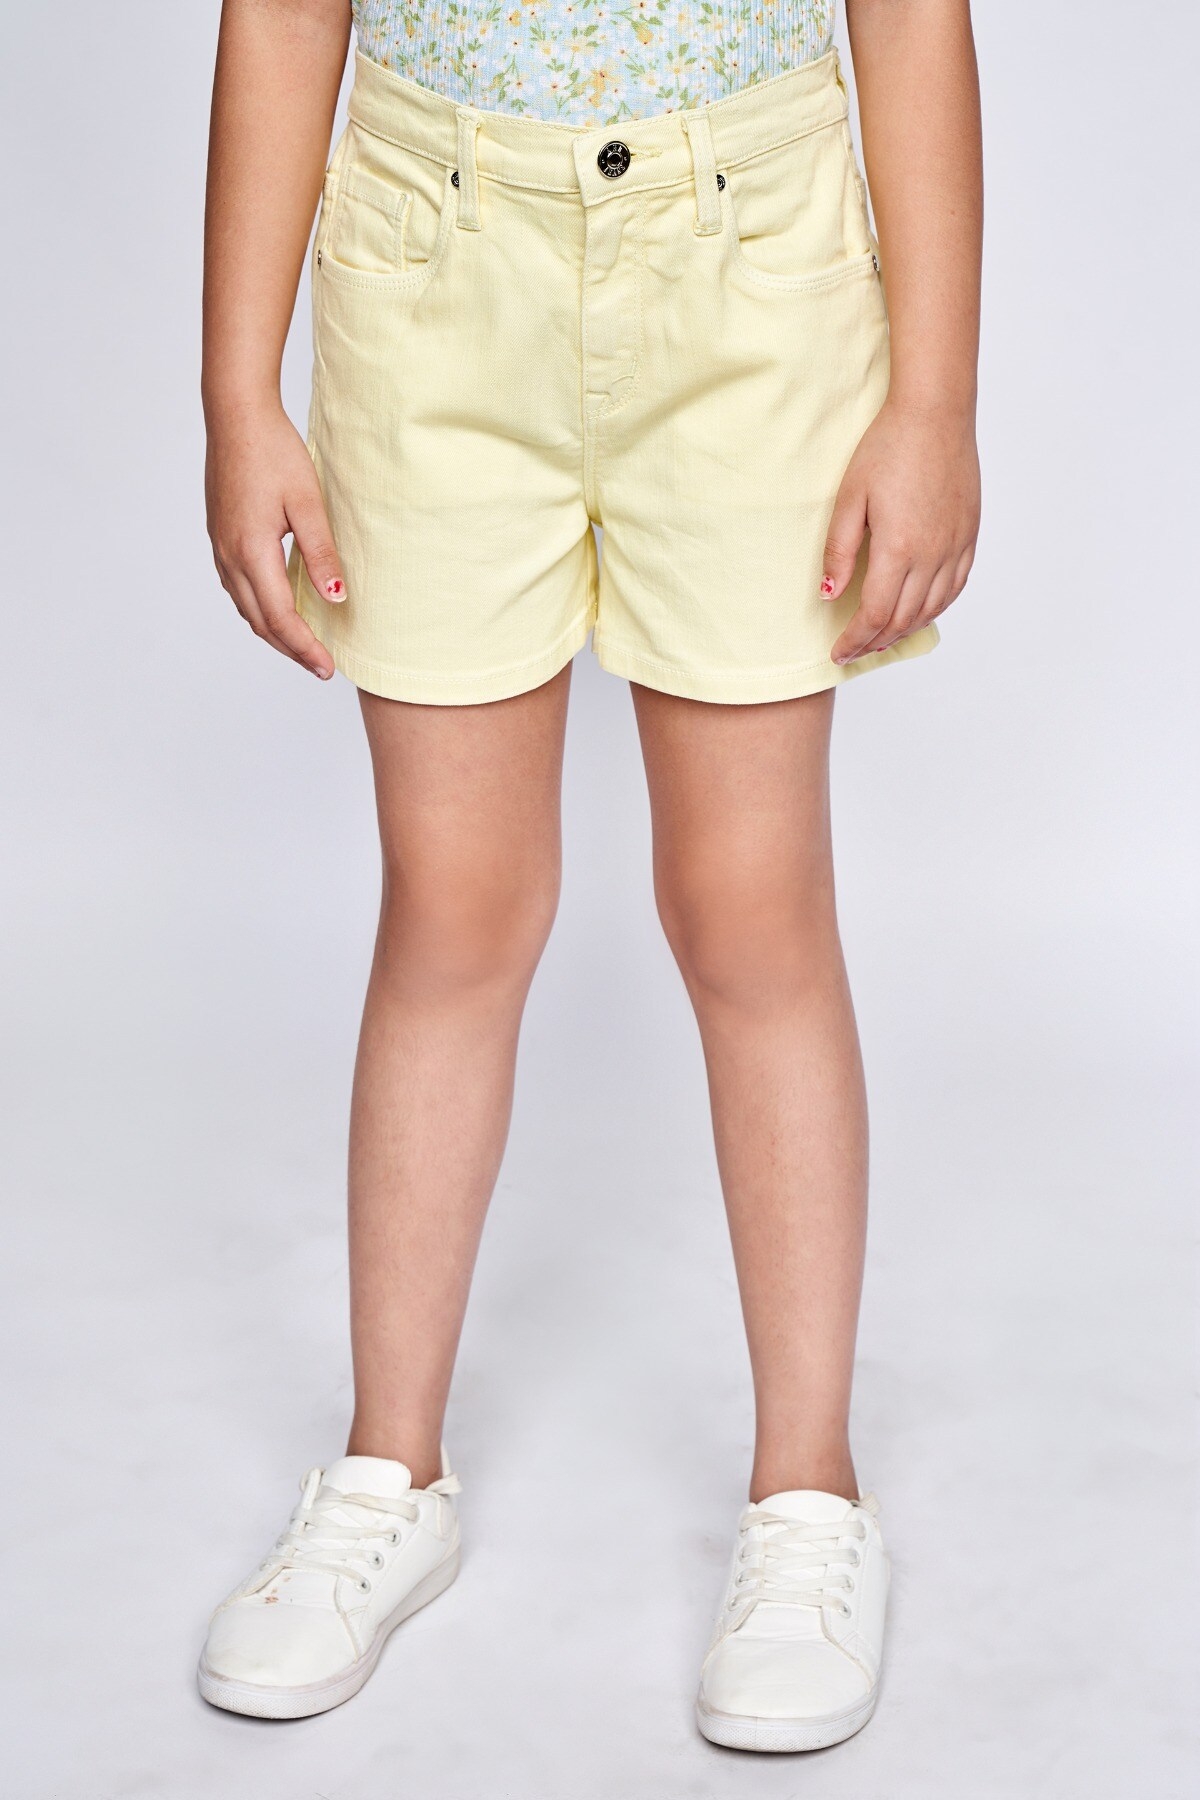 AND Yellow Shorts